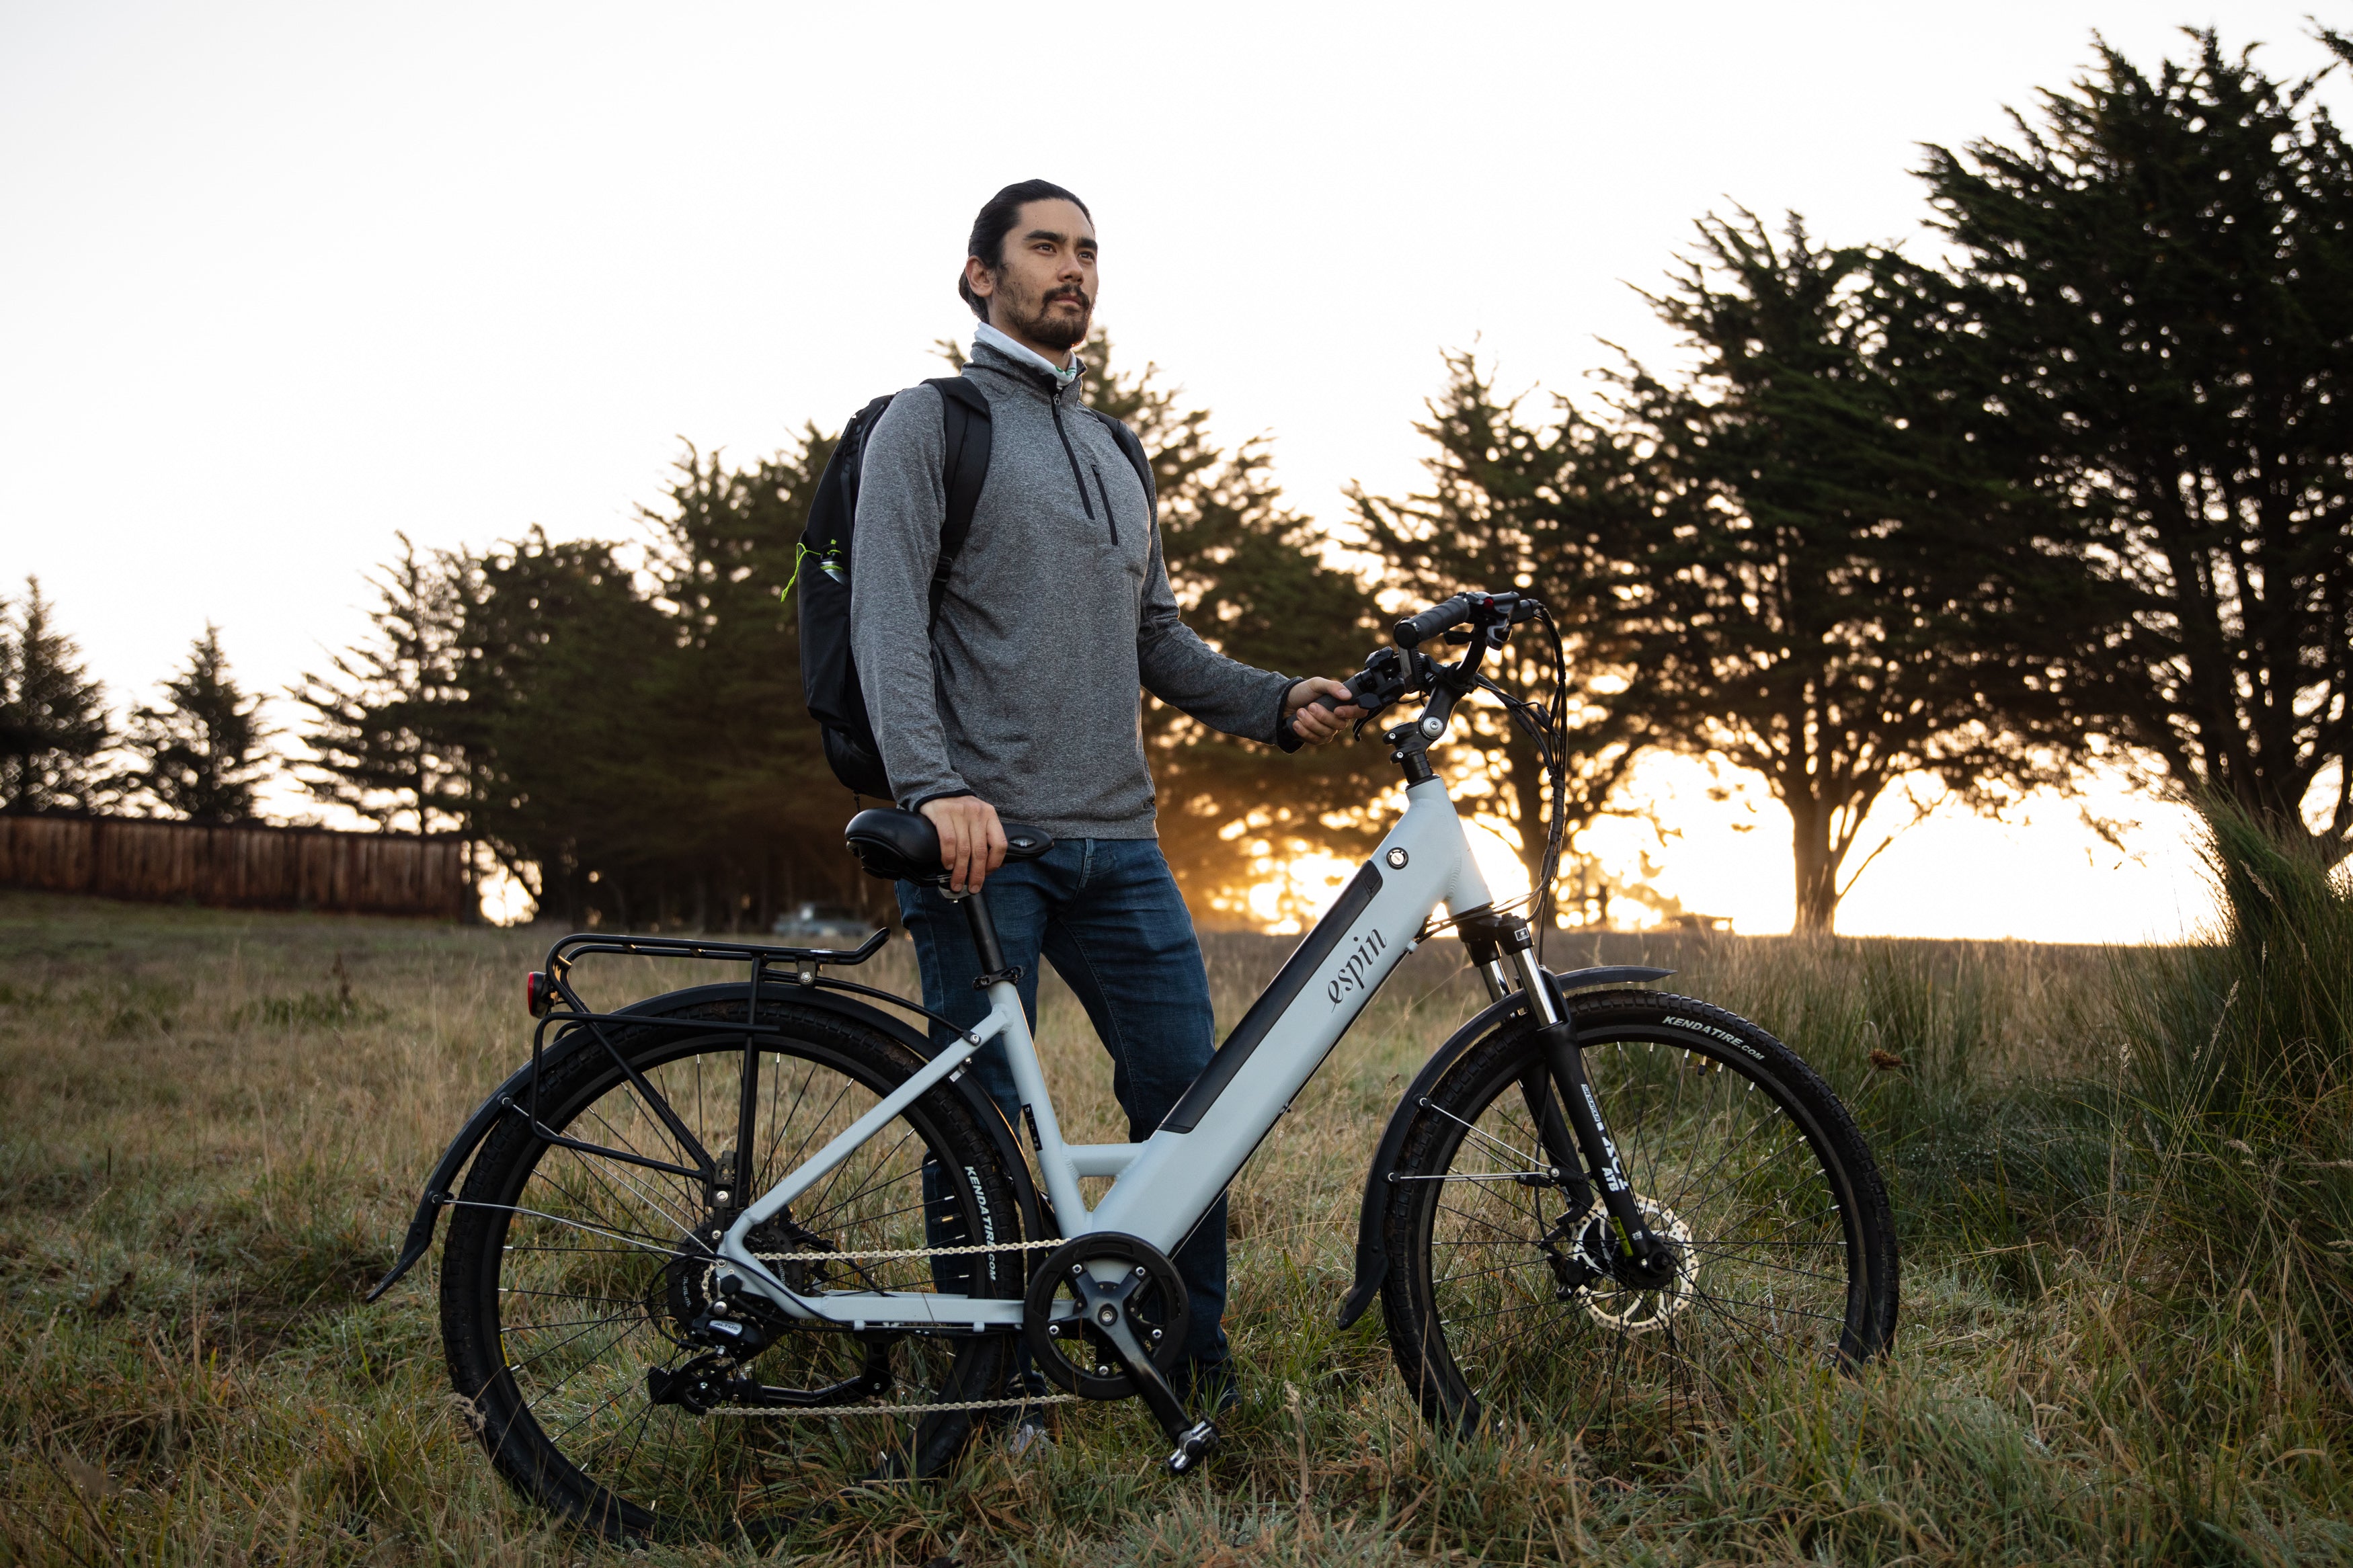 5 Environmentally Friendly Benefits of Owning an eBike